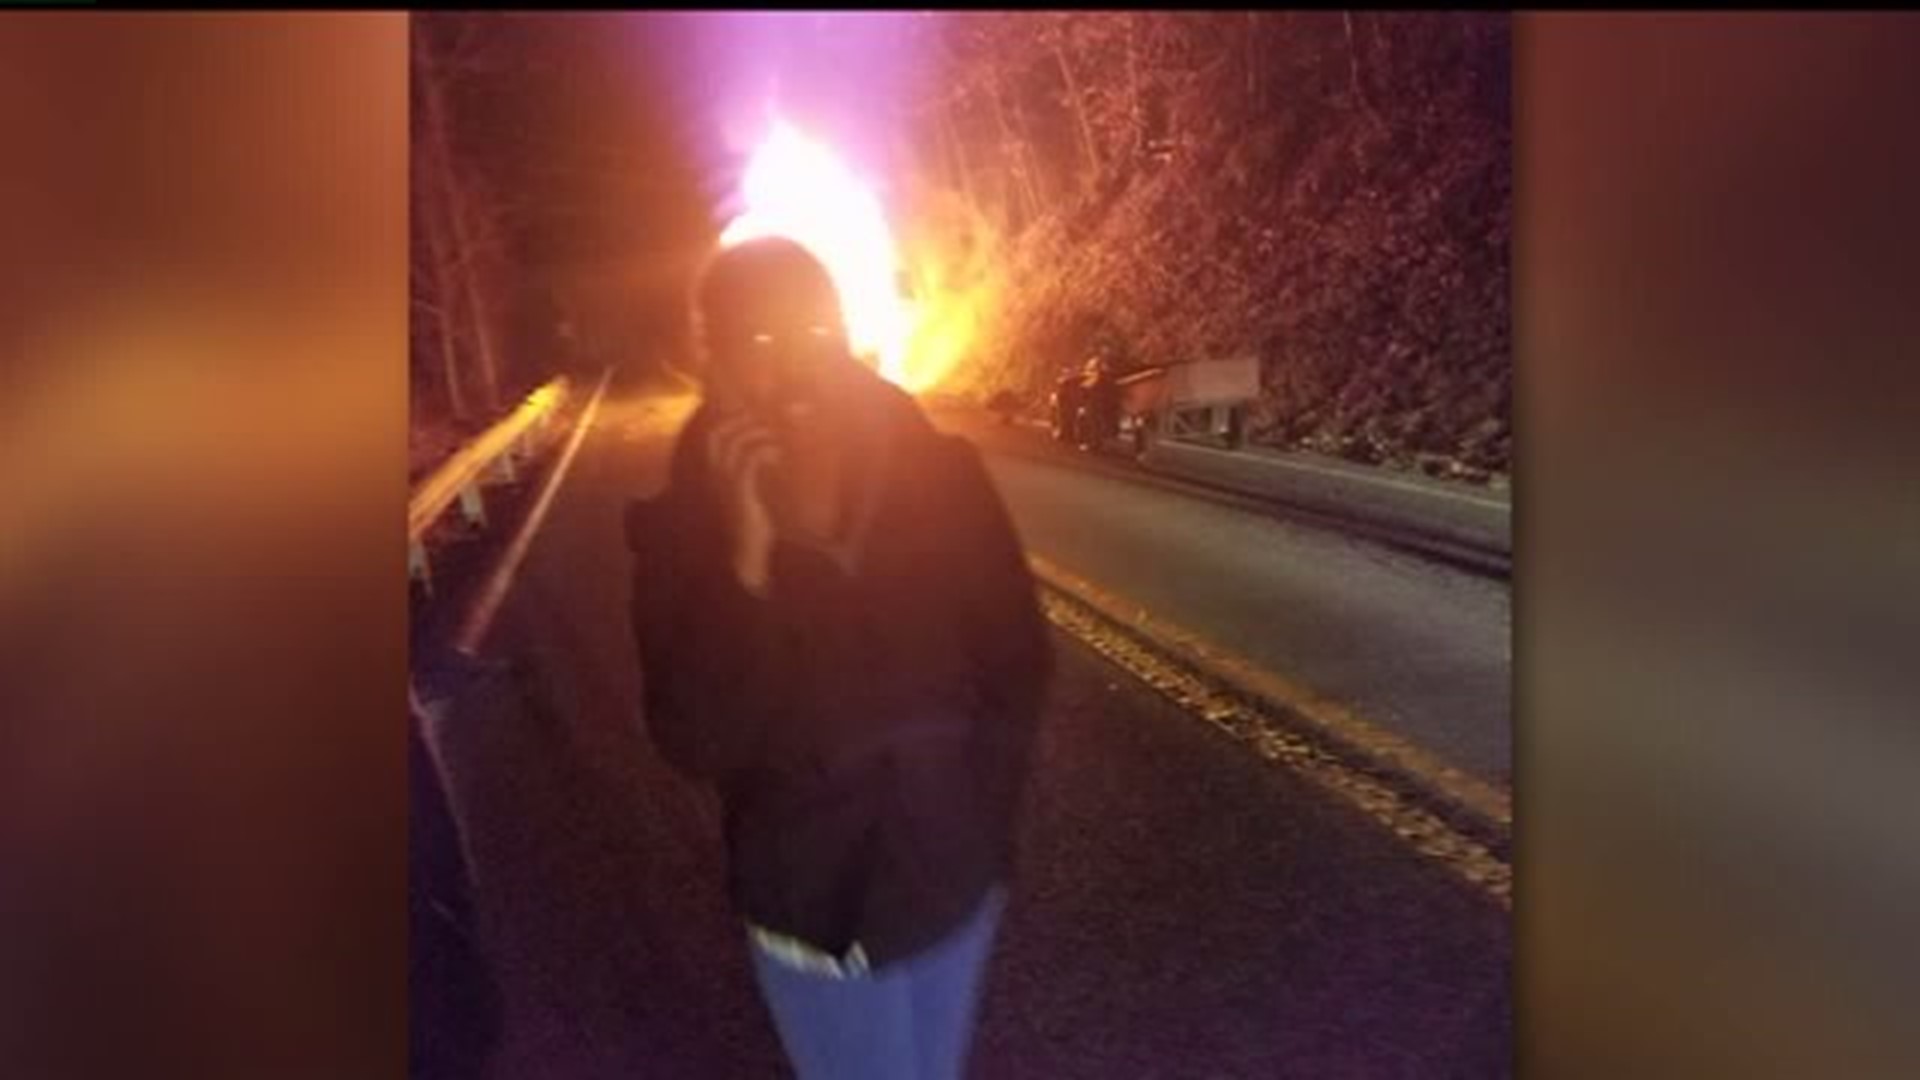 Family comes to the aid of men trapped in burning car